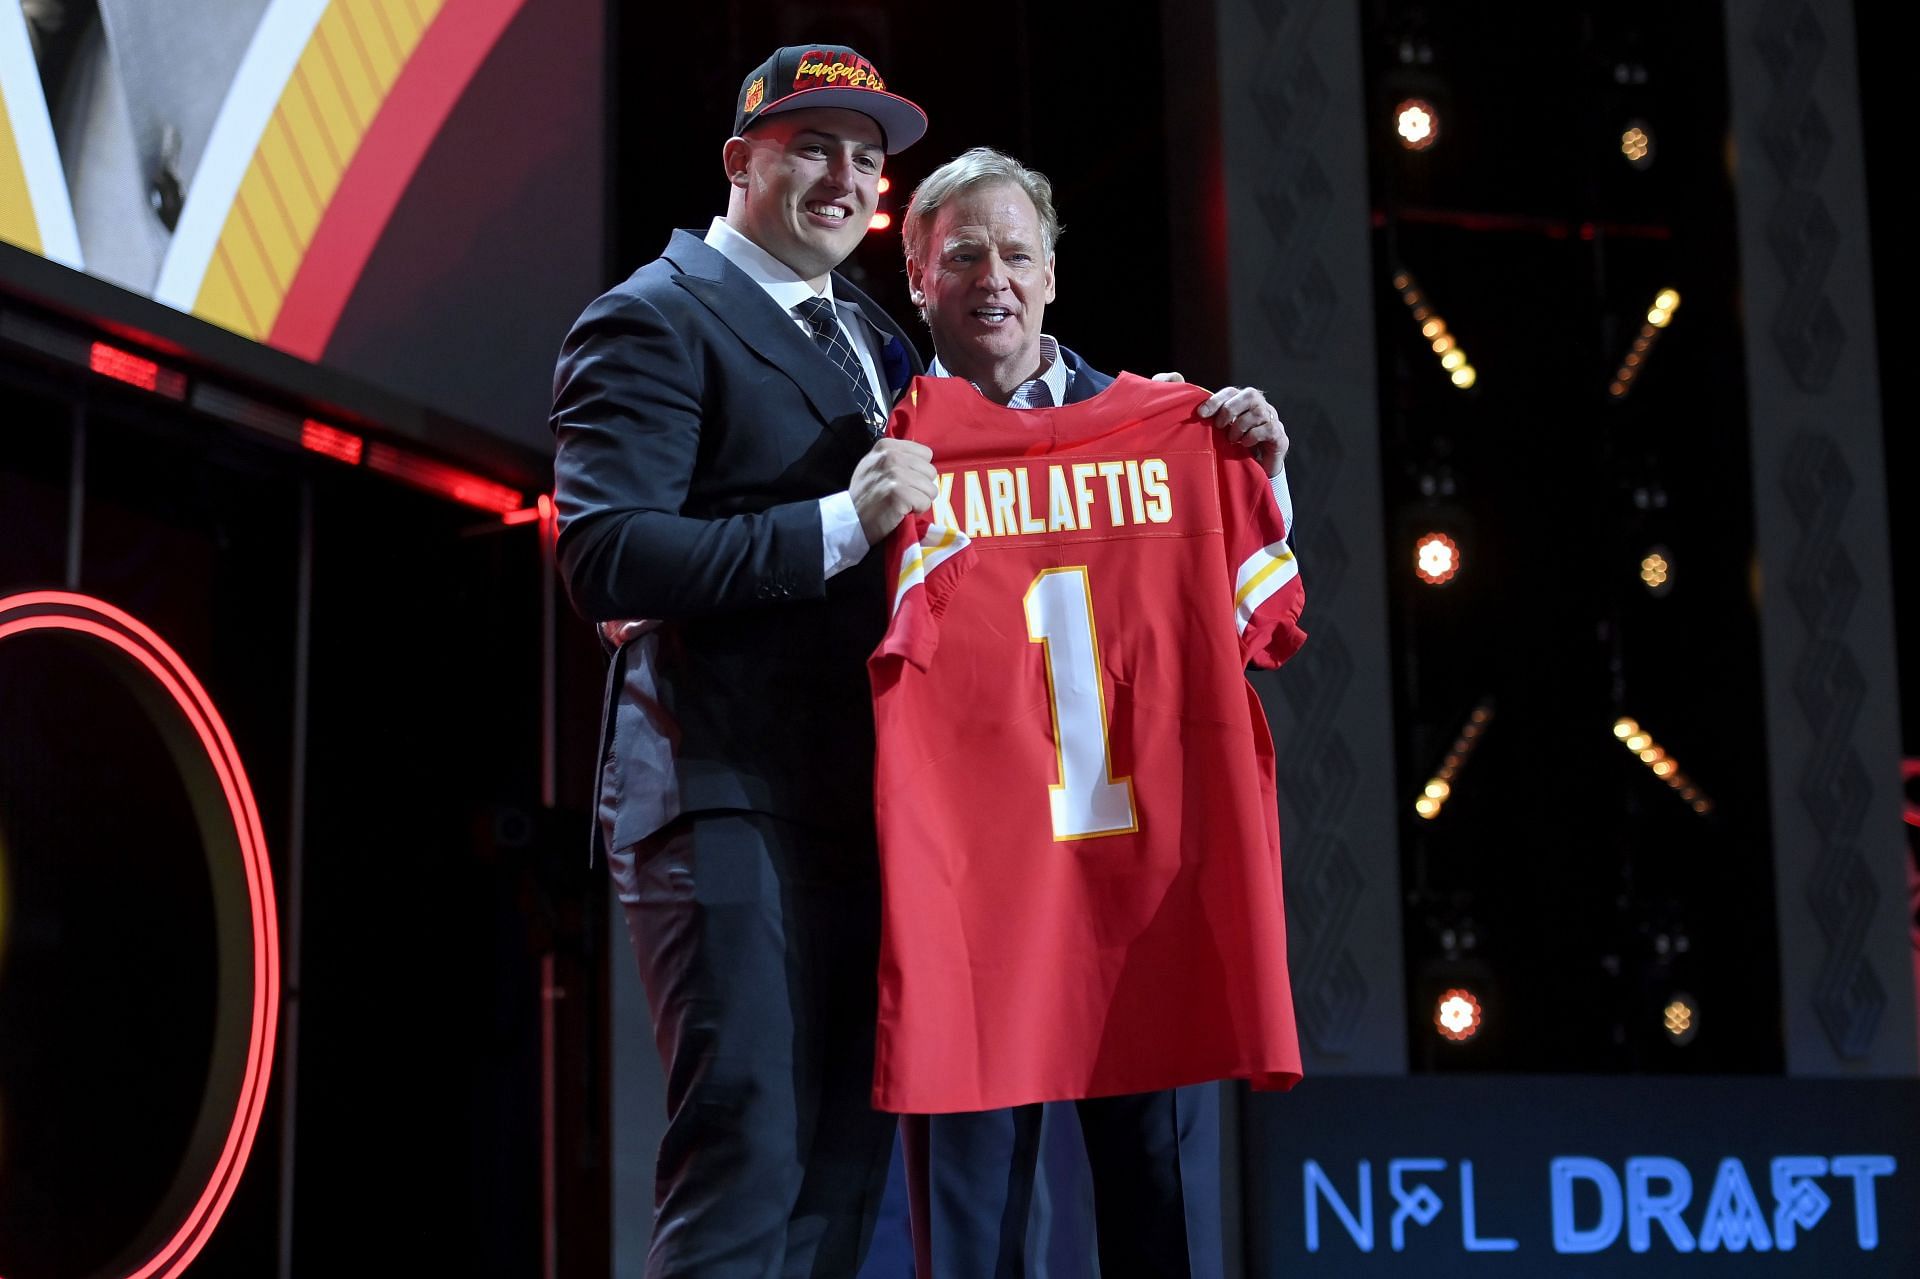 The Kansas City Chiefs picked George Karlaftis with the 30th Pick in Round 1 of the 2022 NFL Draft